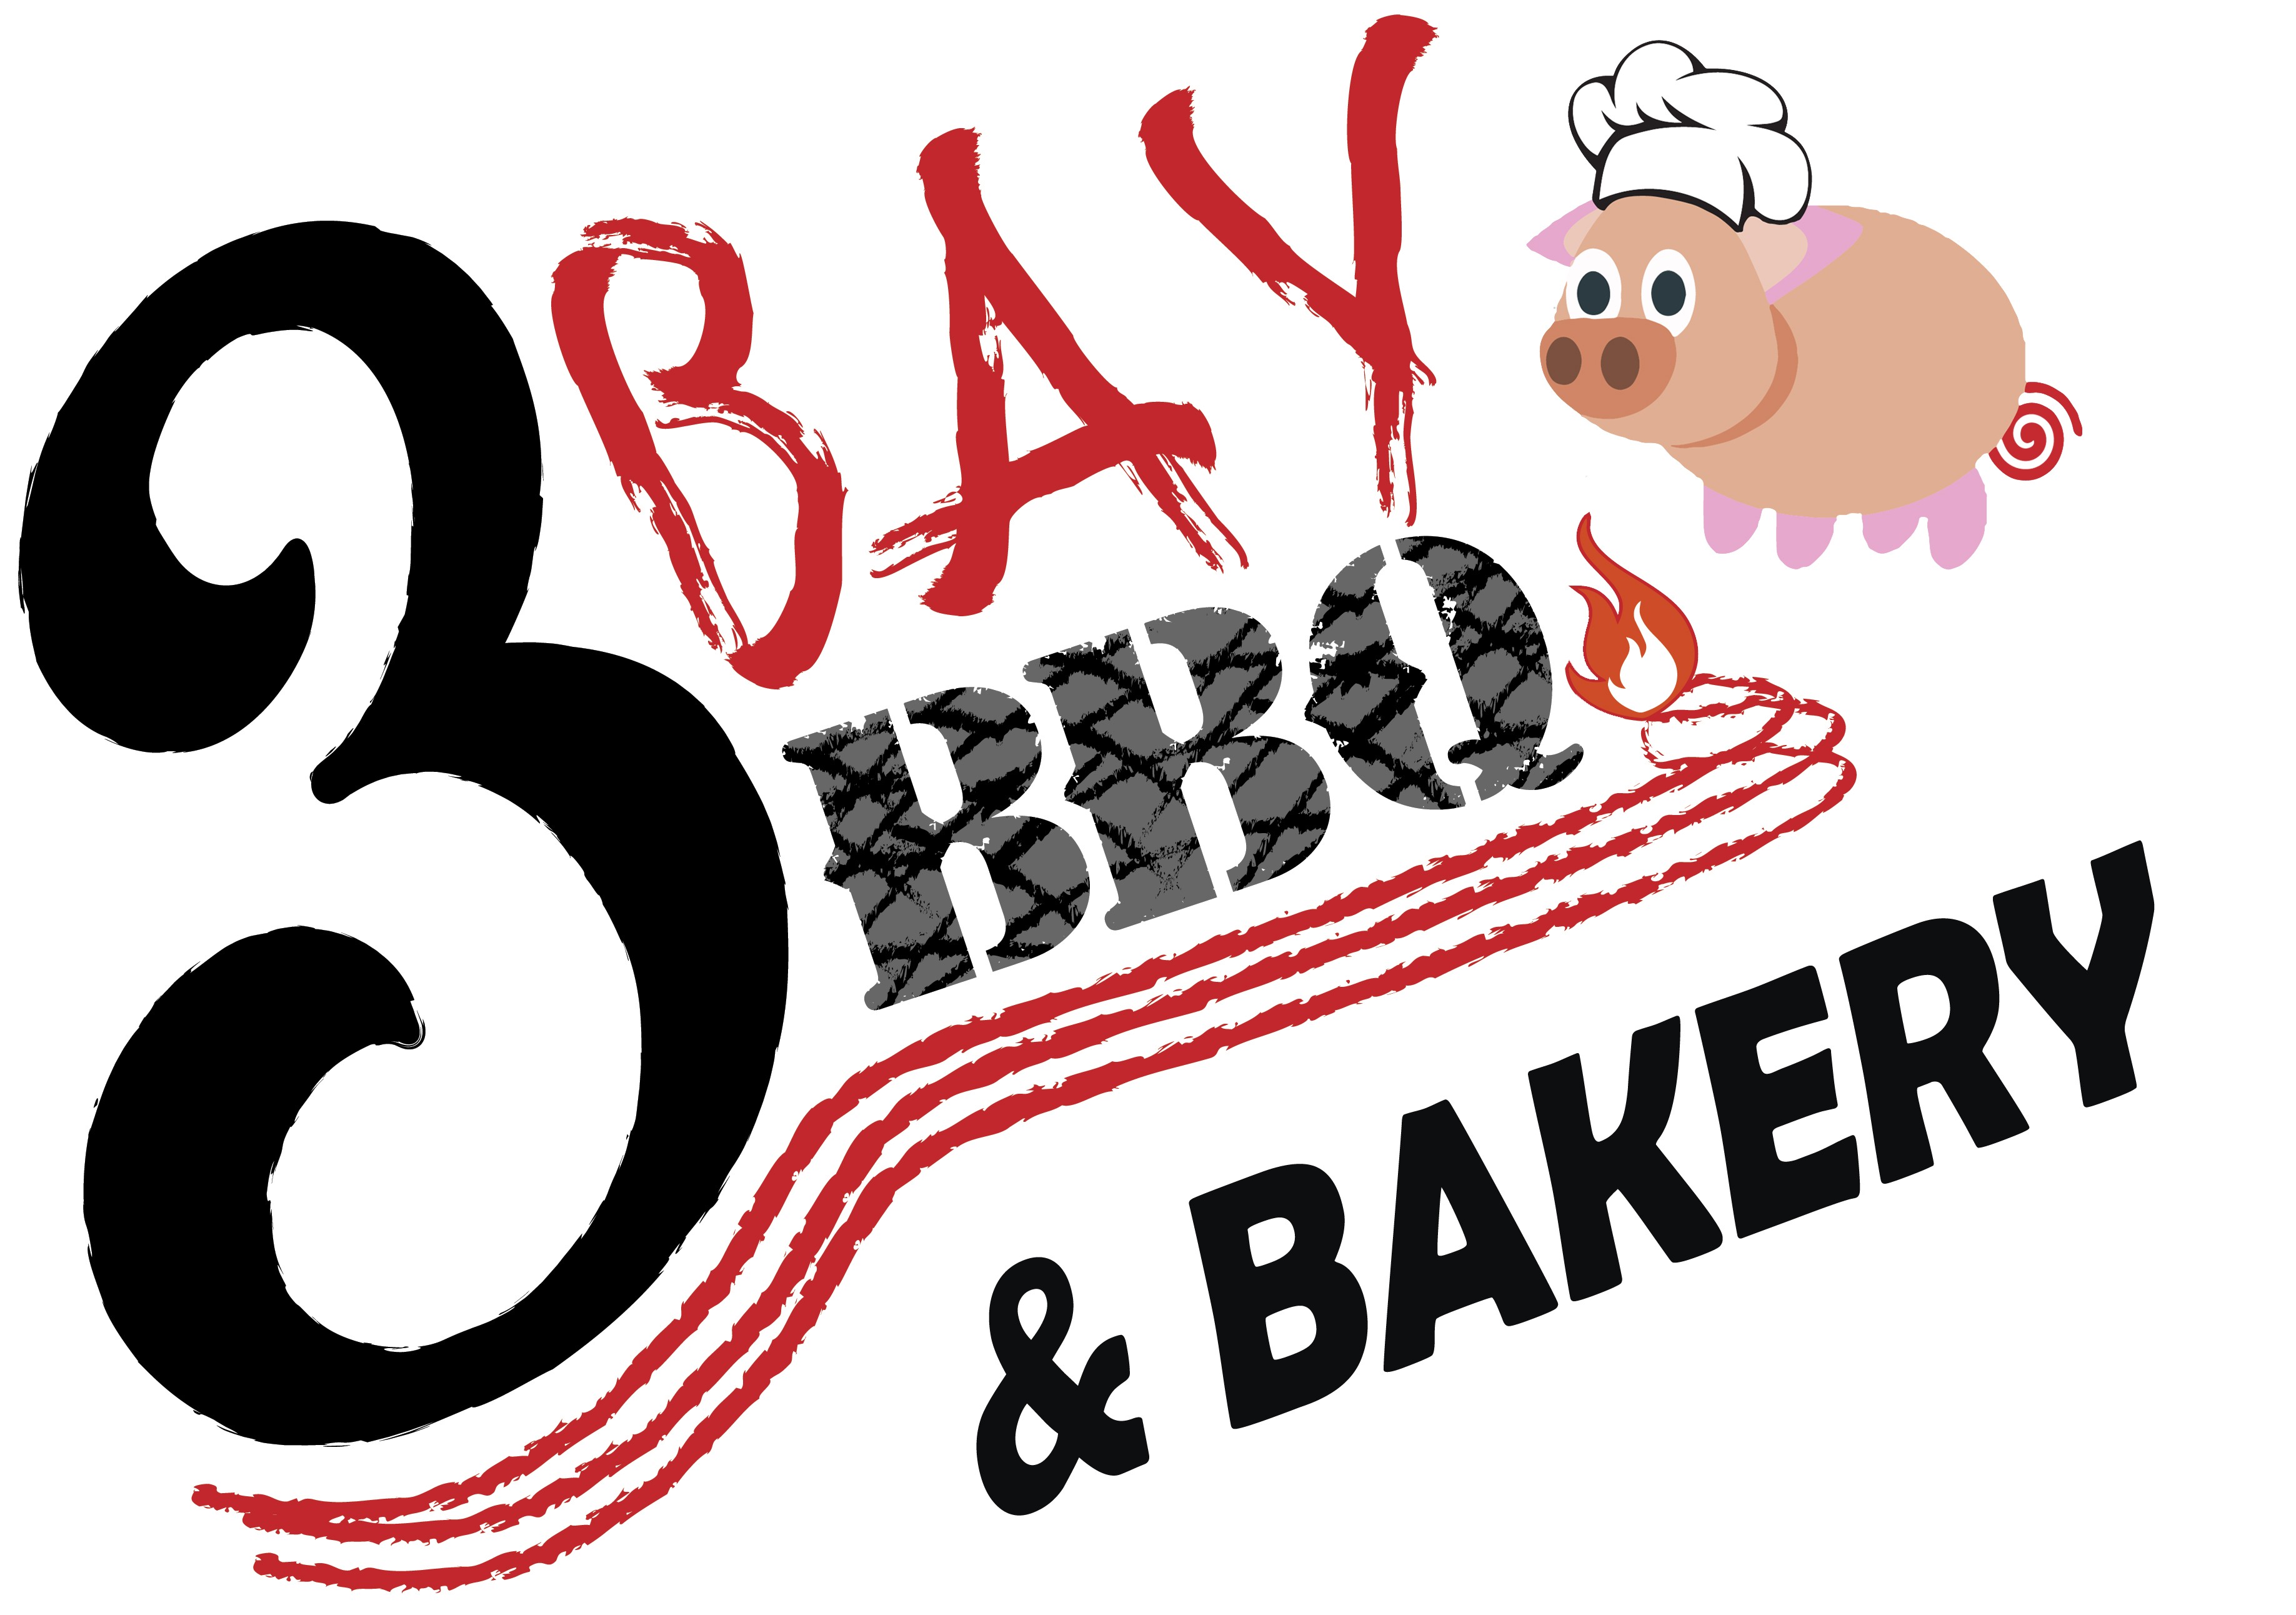 3 Bay Bbq and Bakery